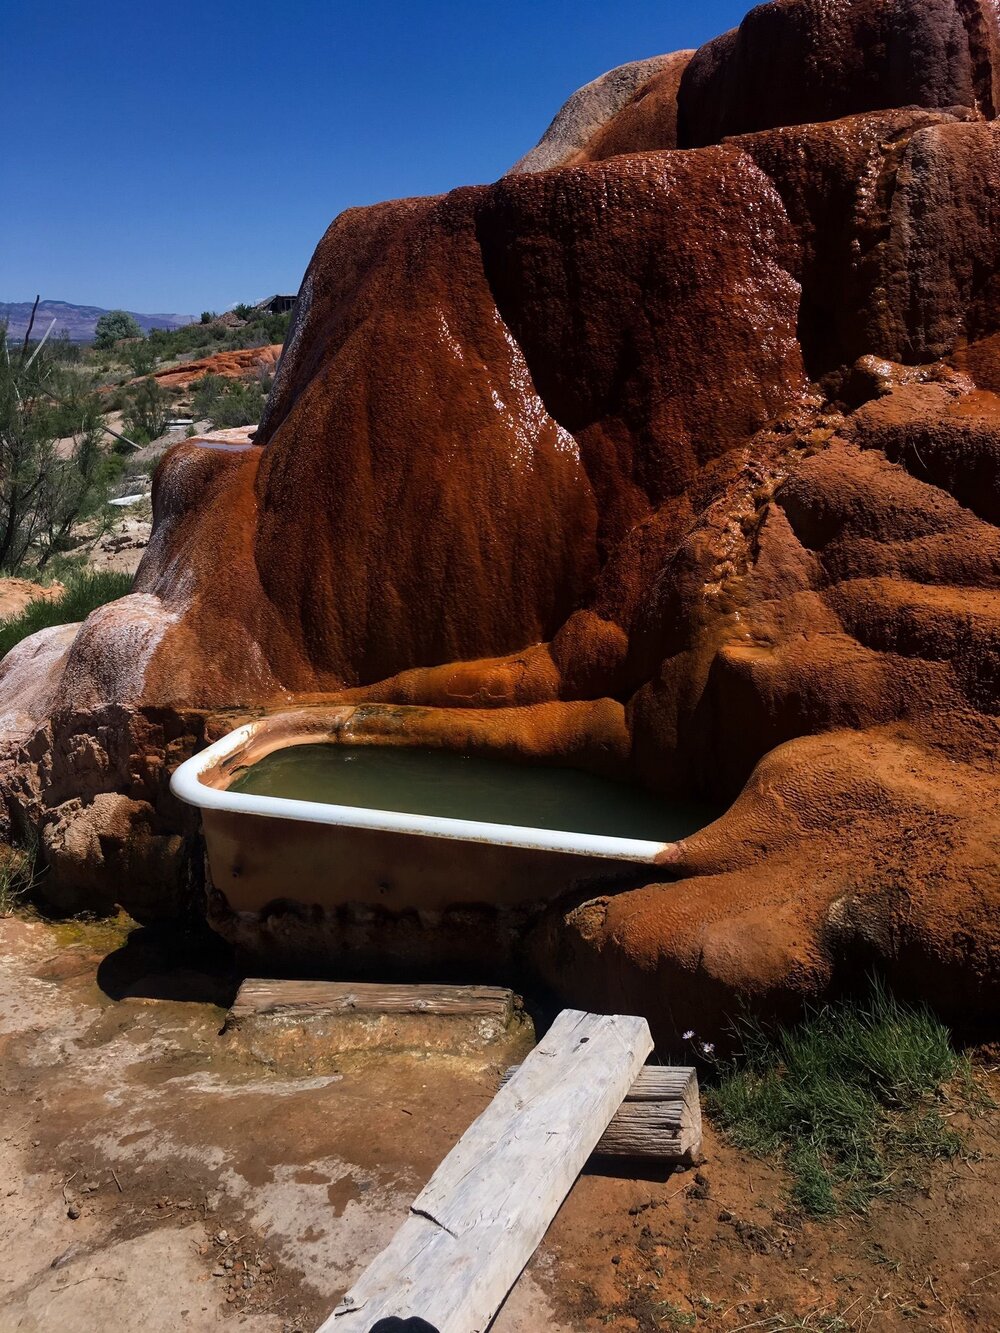  Individual hot springs’ tub at Mystic Hot Springs - Photo from AllTrails.com 